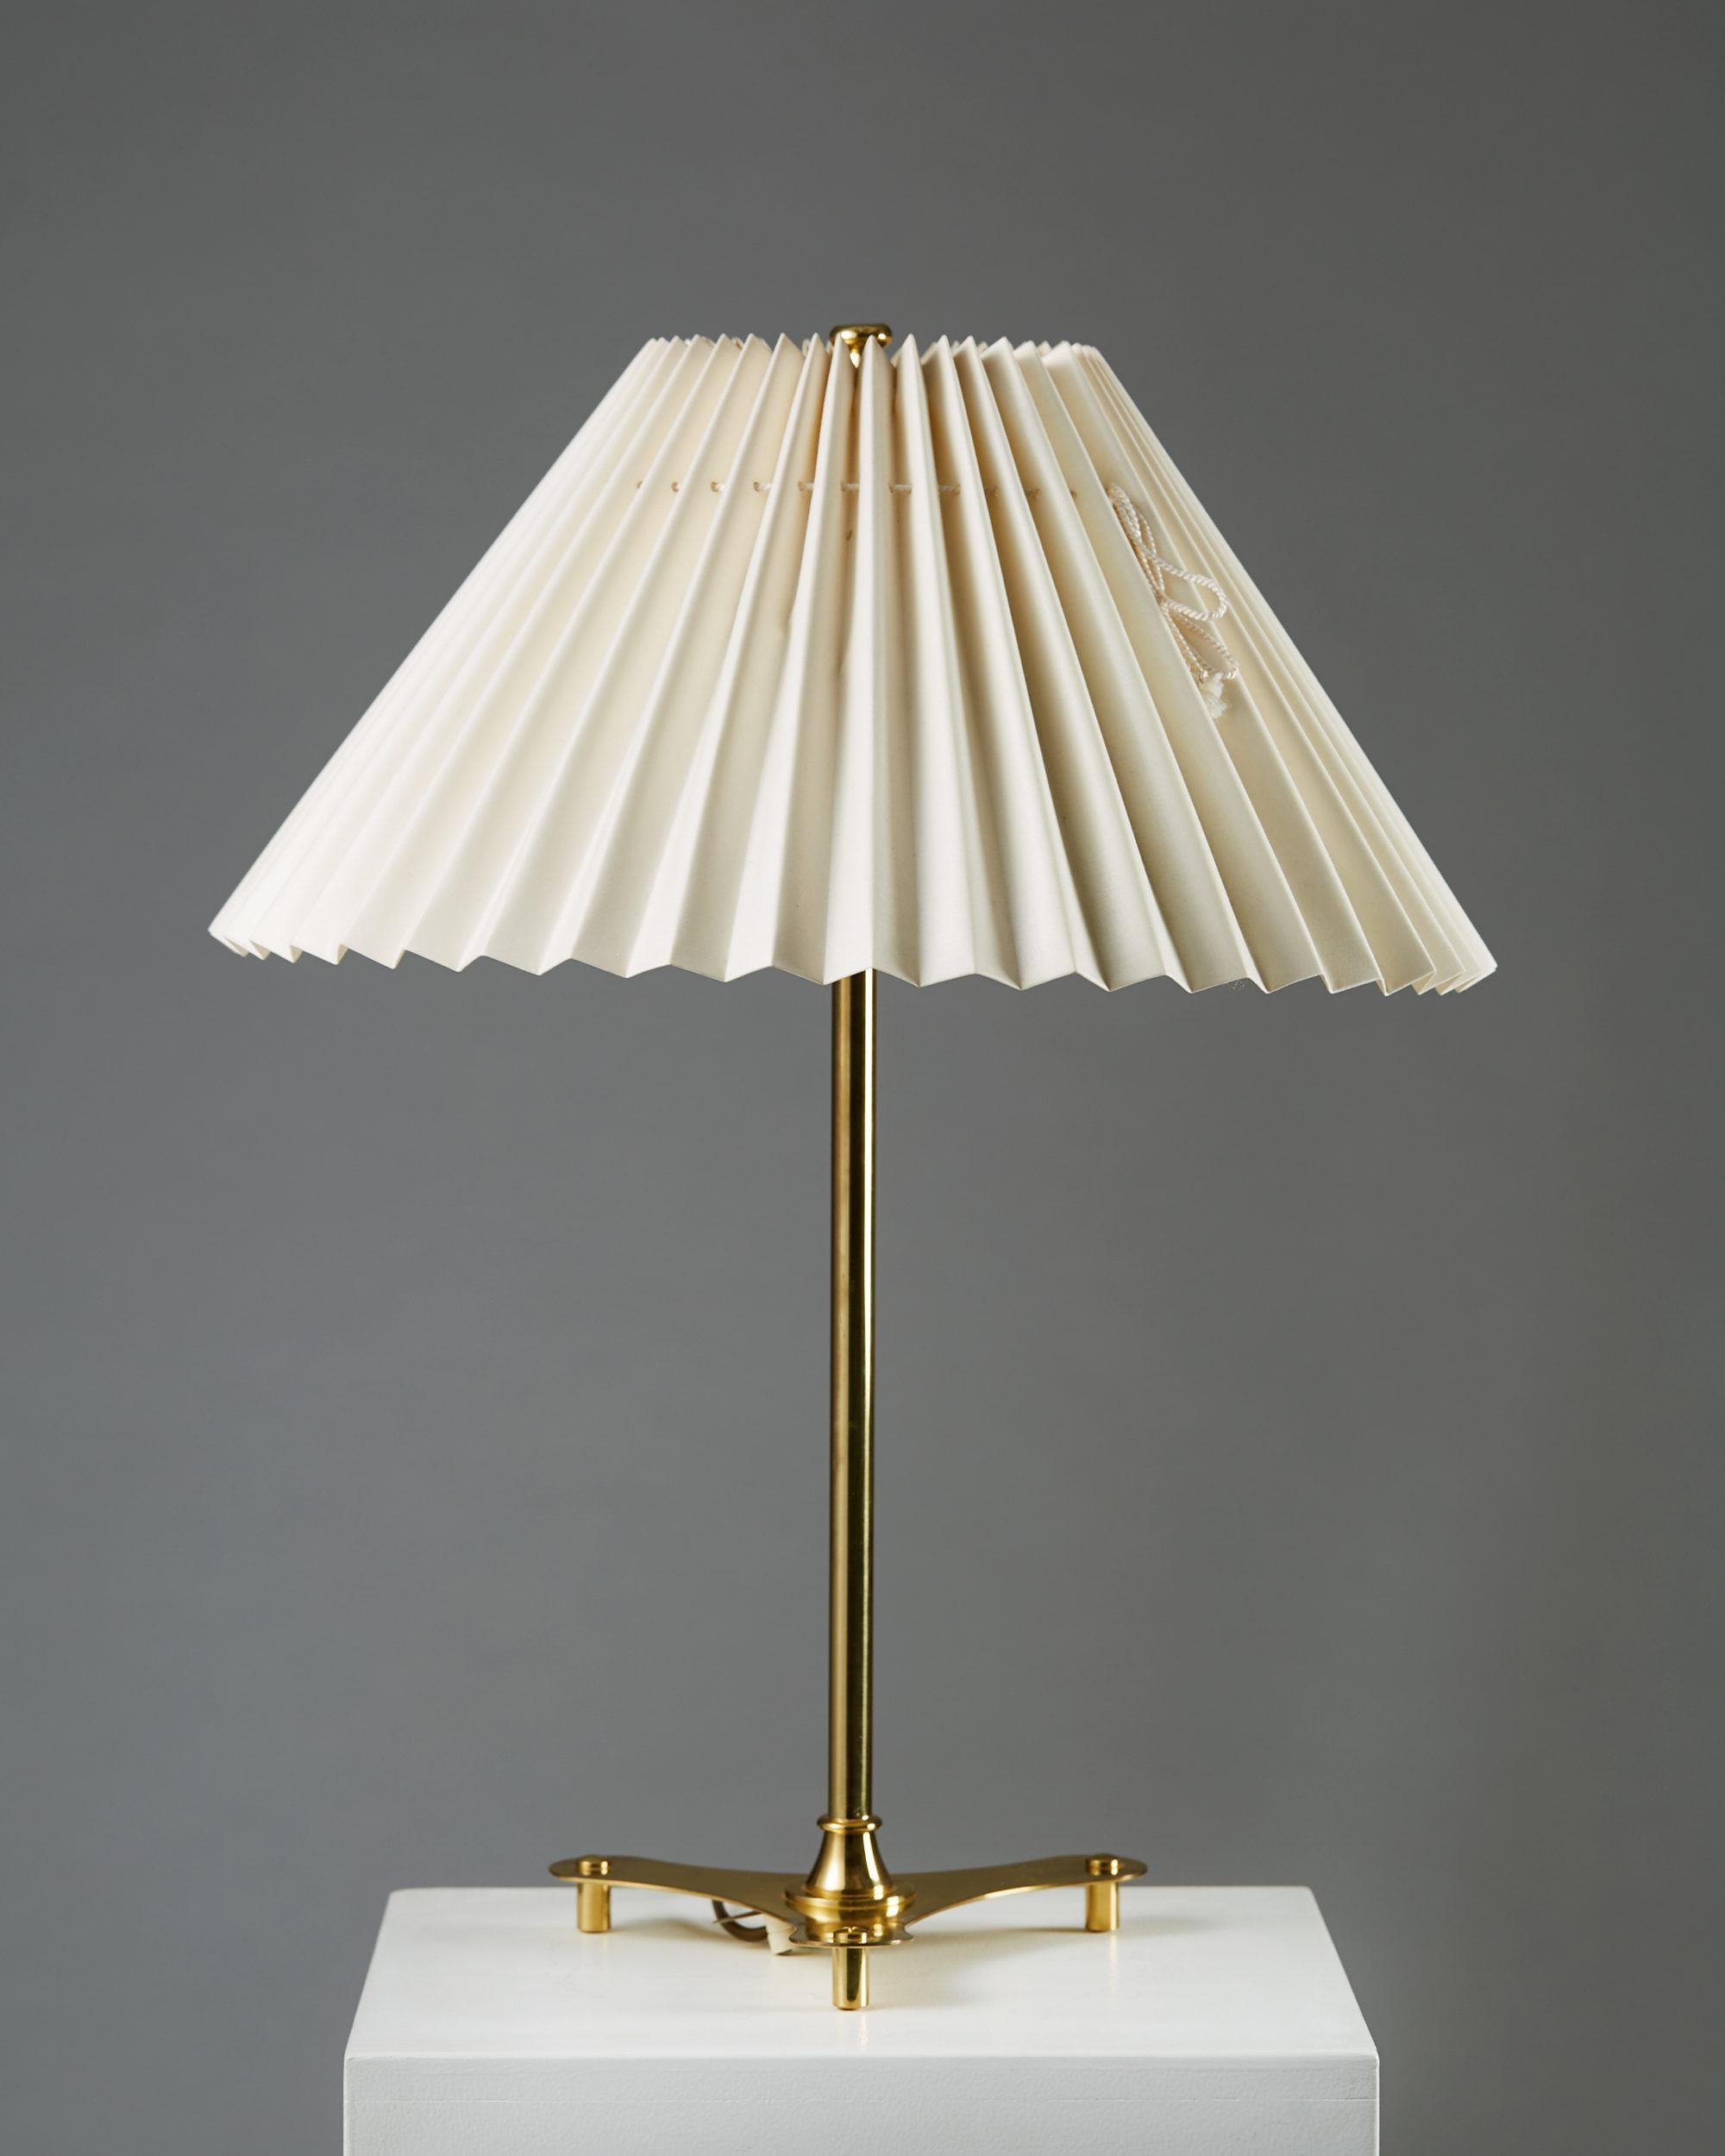 Polished brass with cotton shade.

Measures: H 58 cm/ 22 7/8